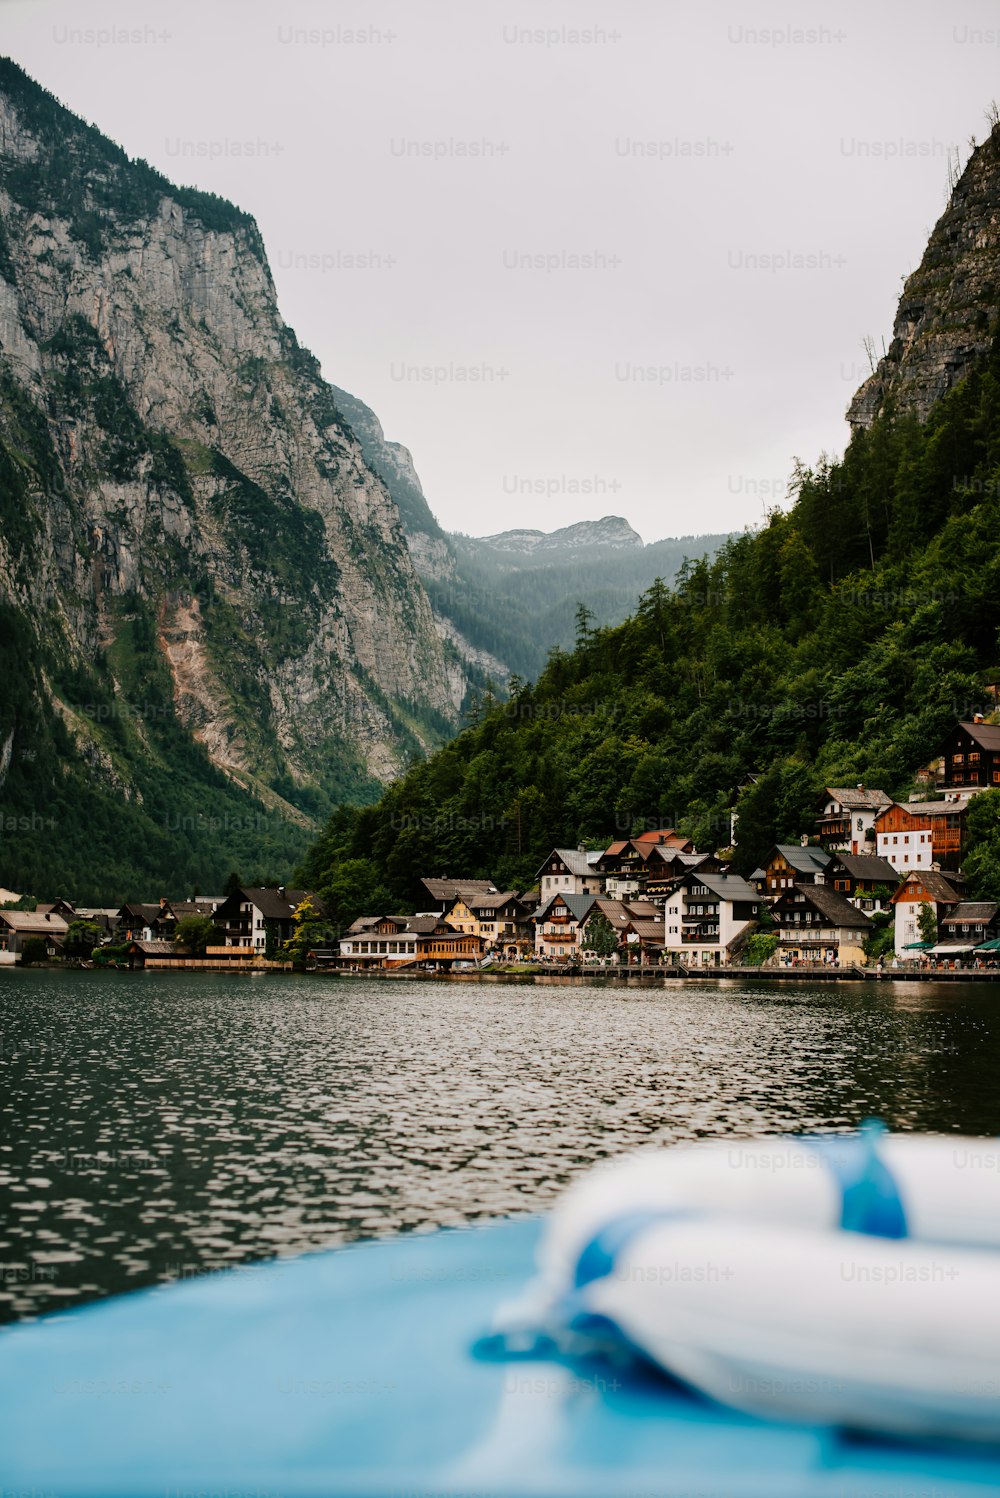 a body of water surrounded by mountains and houses